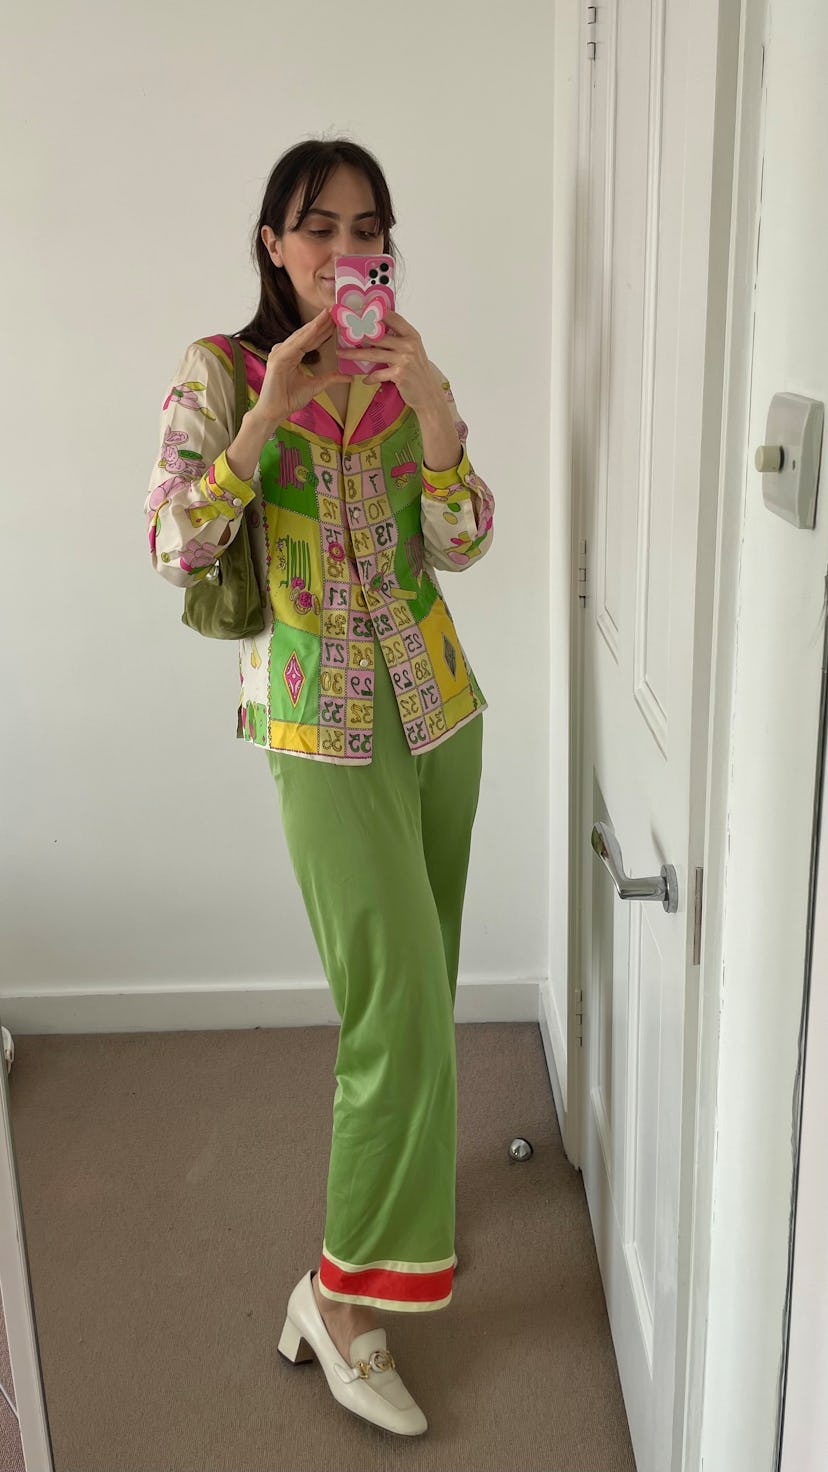 Rio wearing her London vintage finds